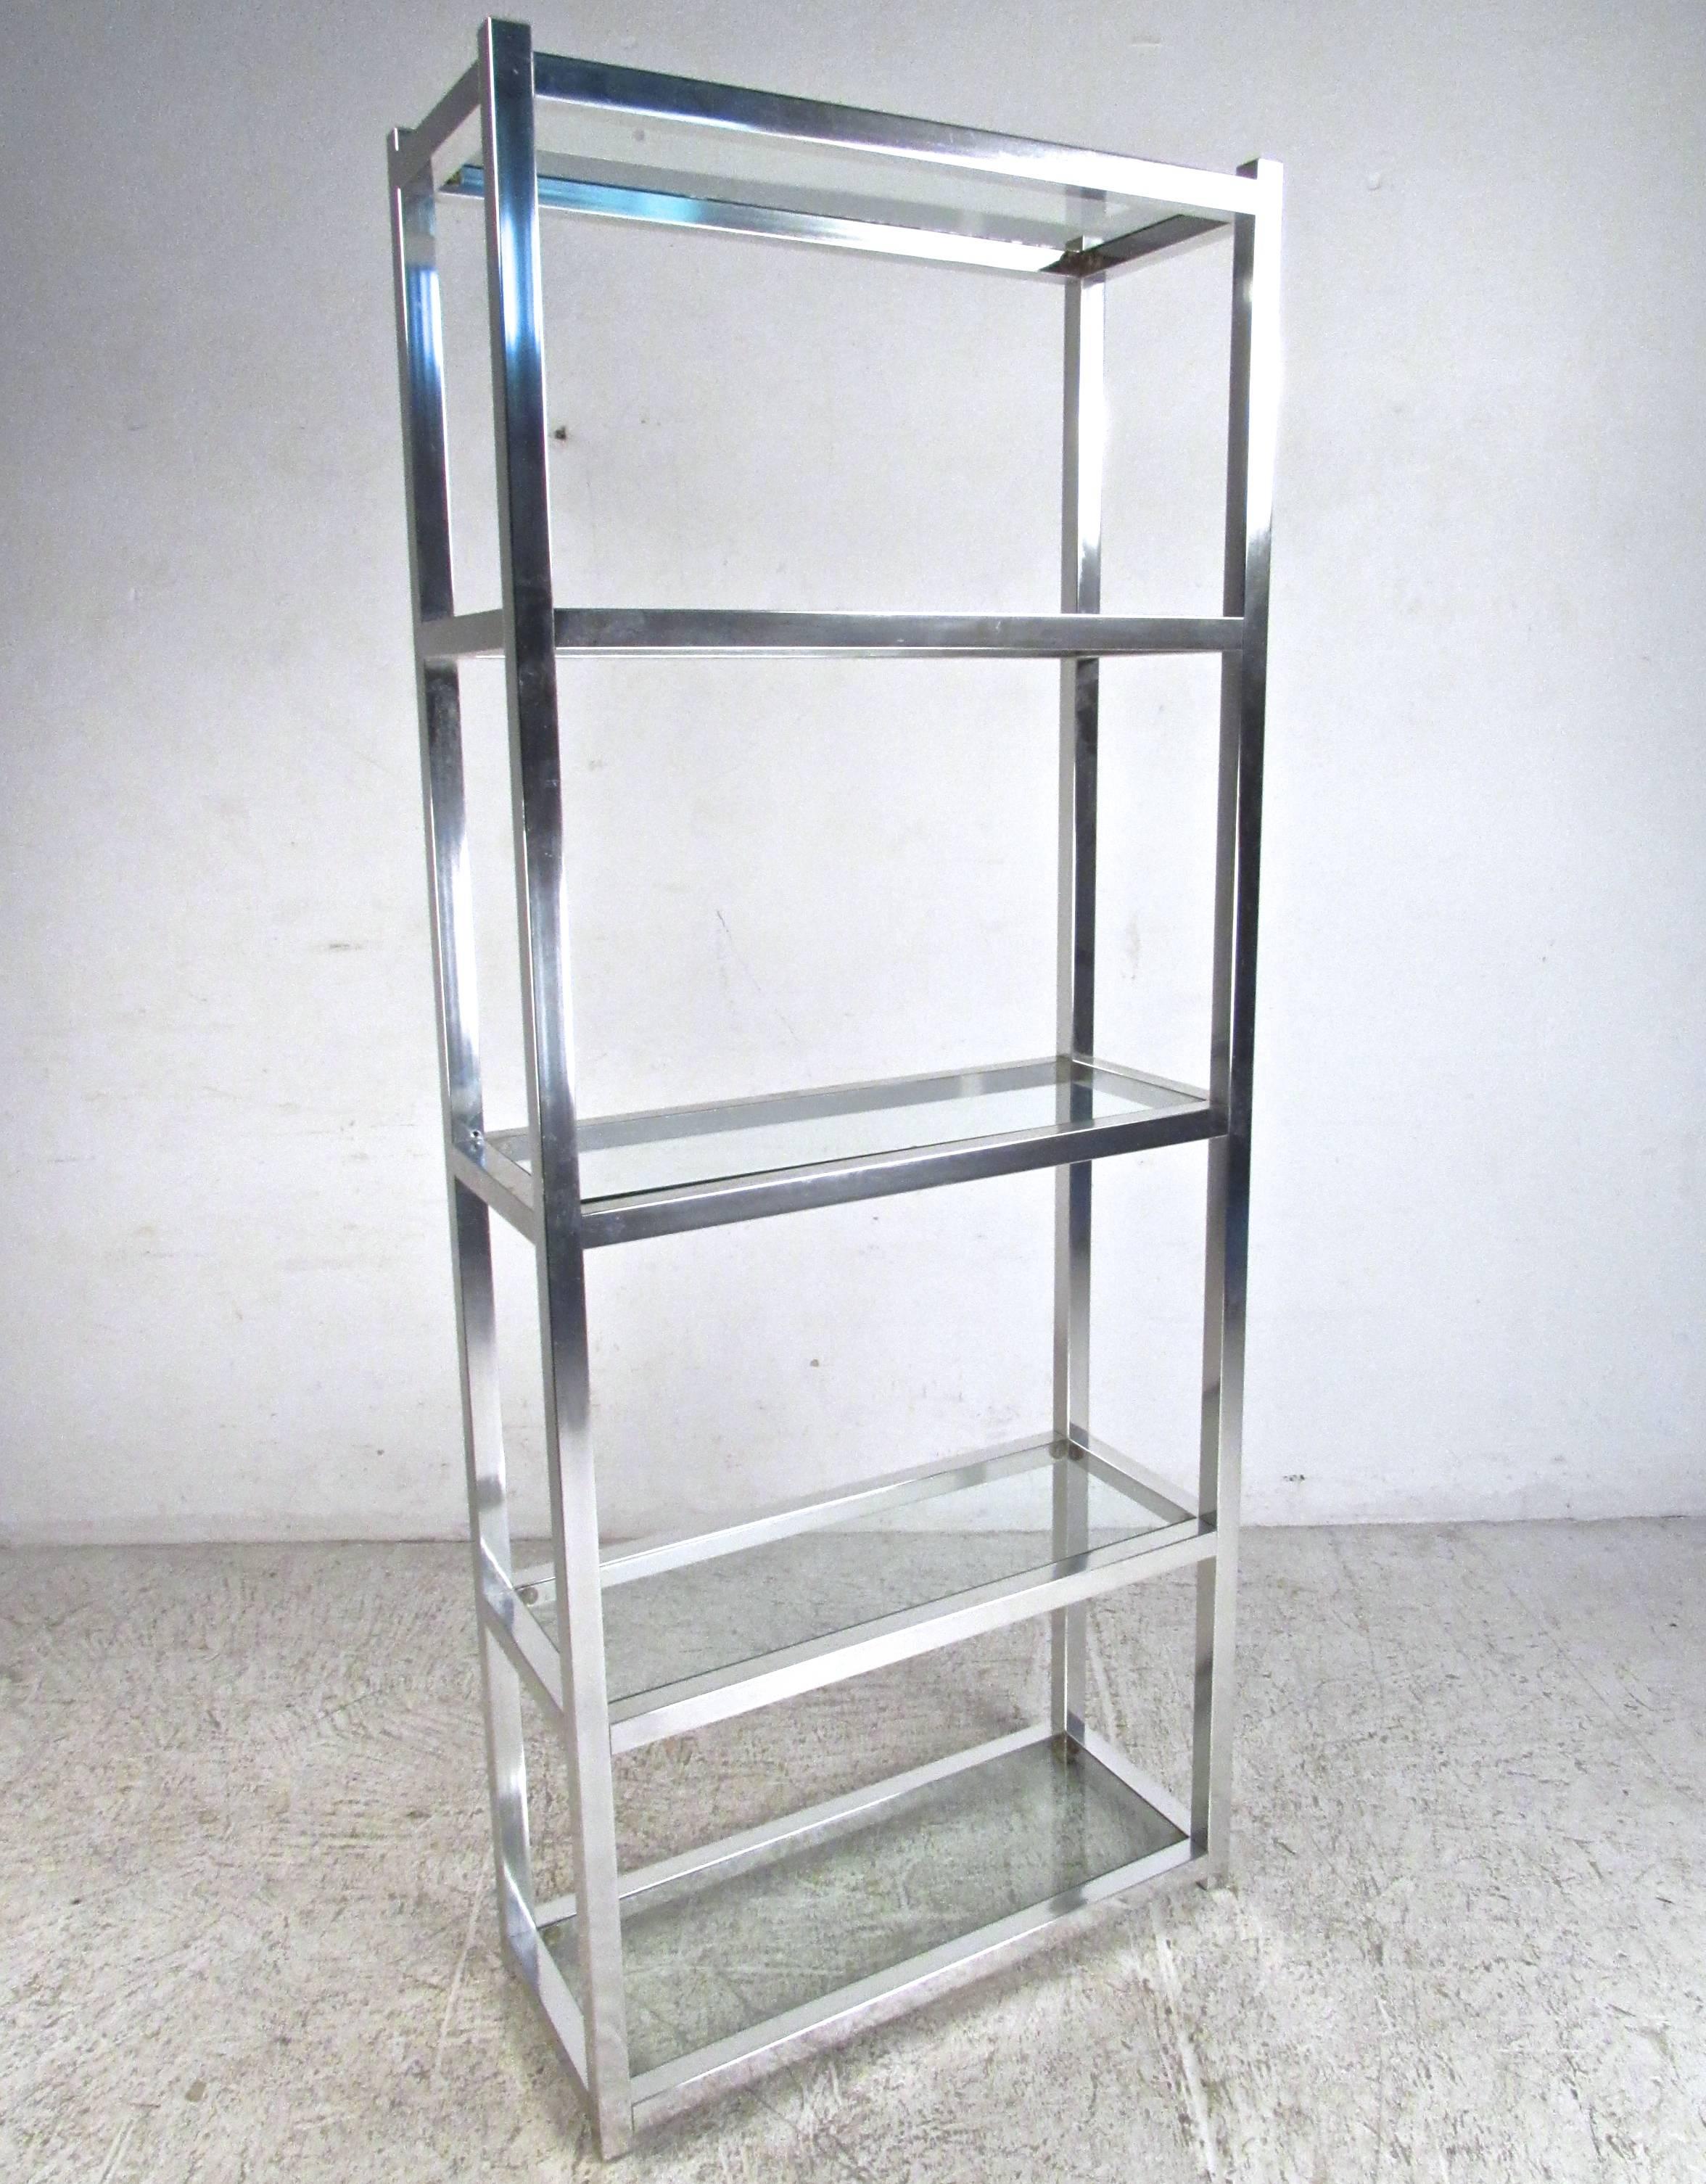 This vintage etagere features five glass inserts and makes a simple yet stylish display piece for home, shop or office. Mid-Century style with plenty of storage/display space makes this a wonderful addition to any interior. Please confirm item